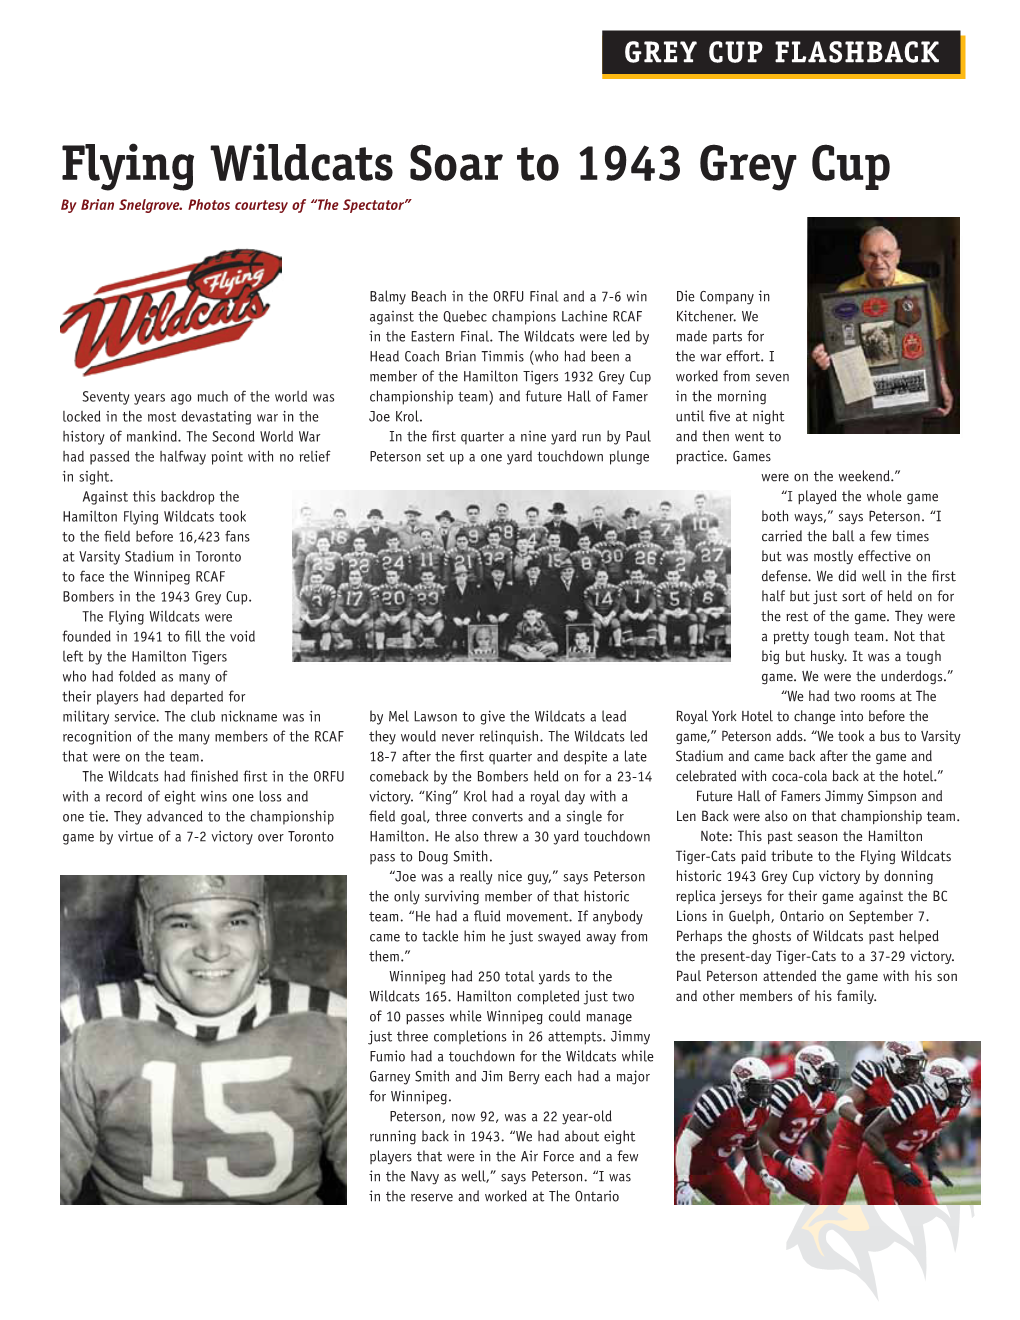 Flying Wildcats Soar to 1943 Grey Cup by Brian Snelgrove